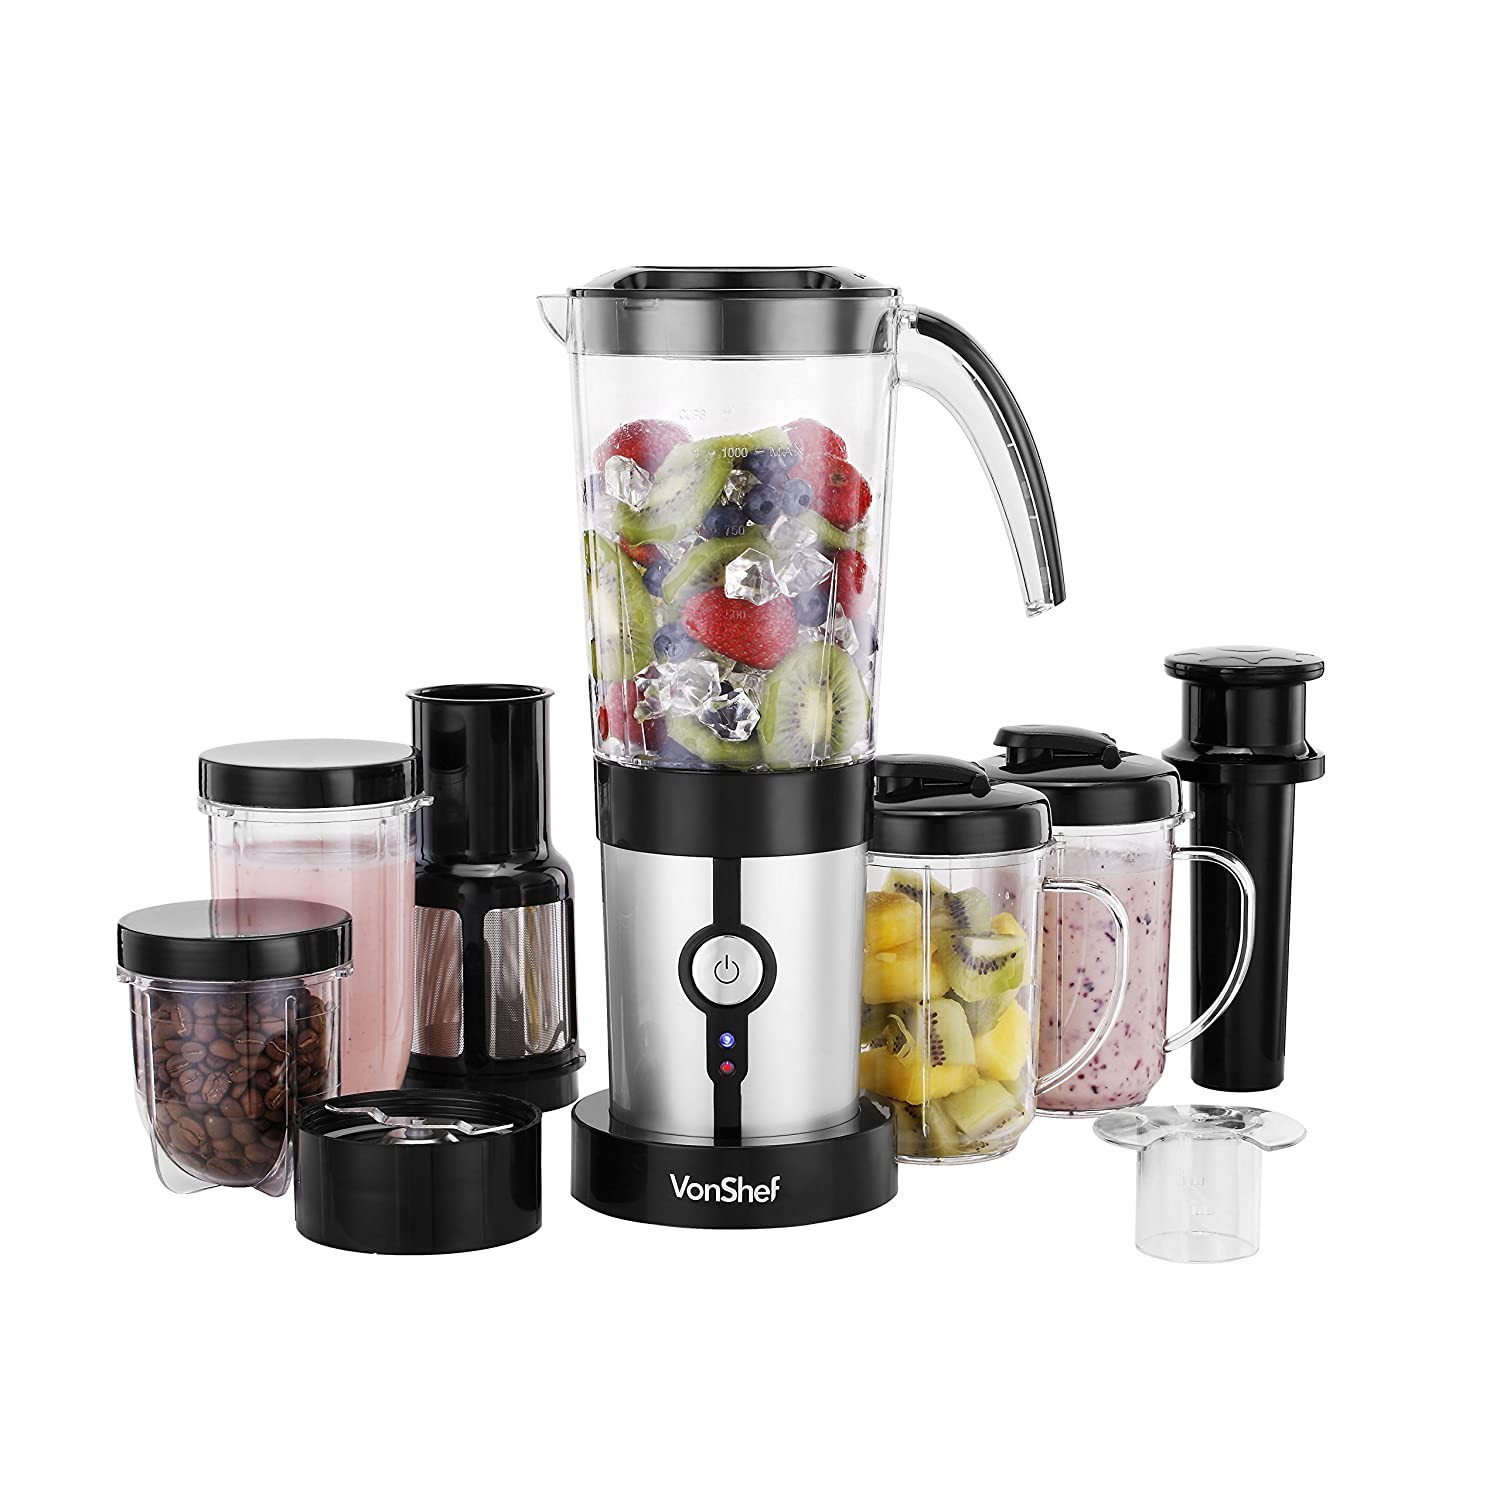 Best Blender To Make Smoothies
 The 5 Best Personal Blenders For Smoothies to Buy in July 2018